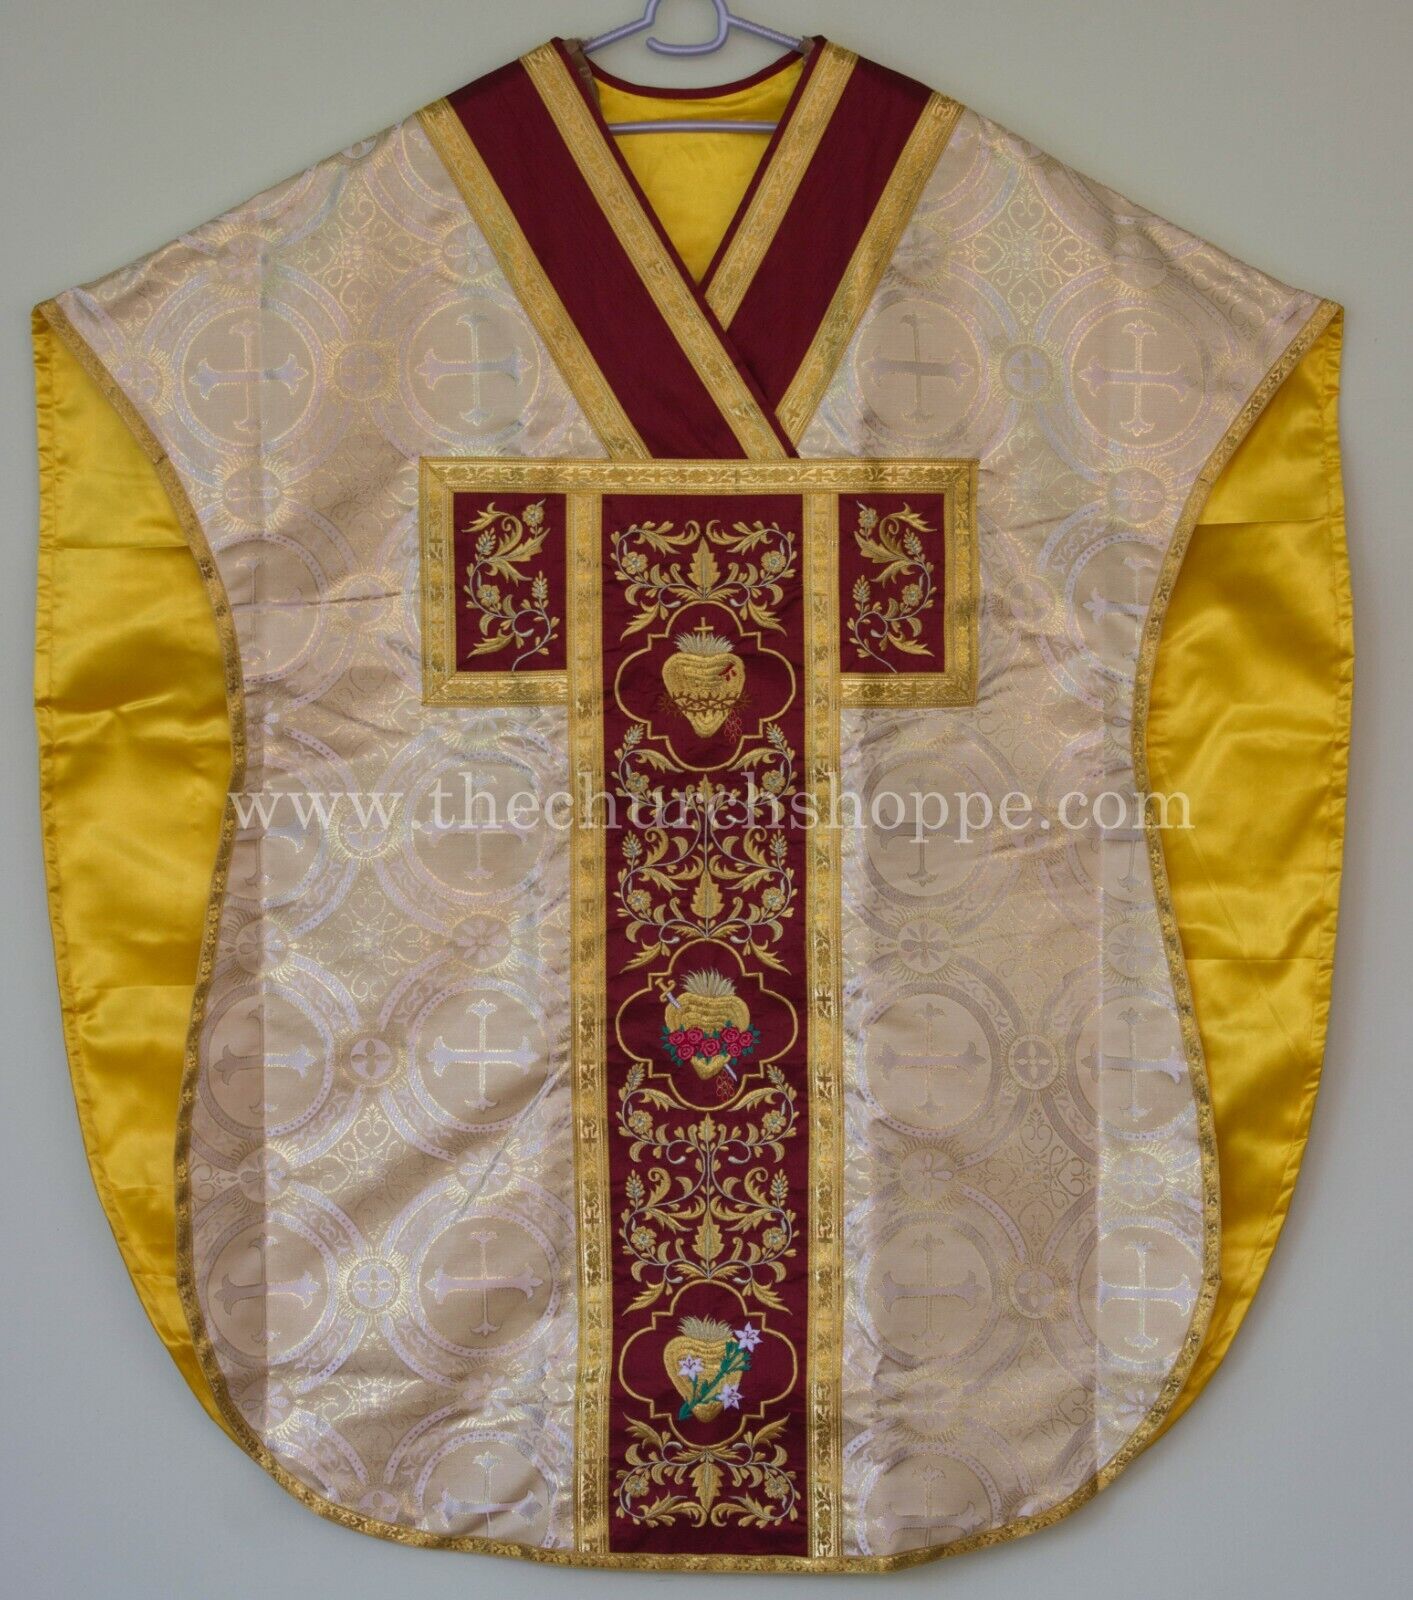 Gold St. Philip Neri vestment Stole & mass set with Three Holy Hearts Embroidery